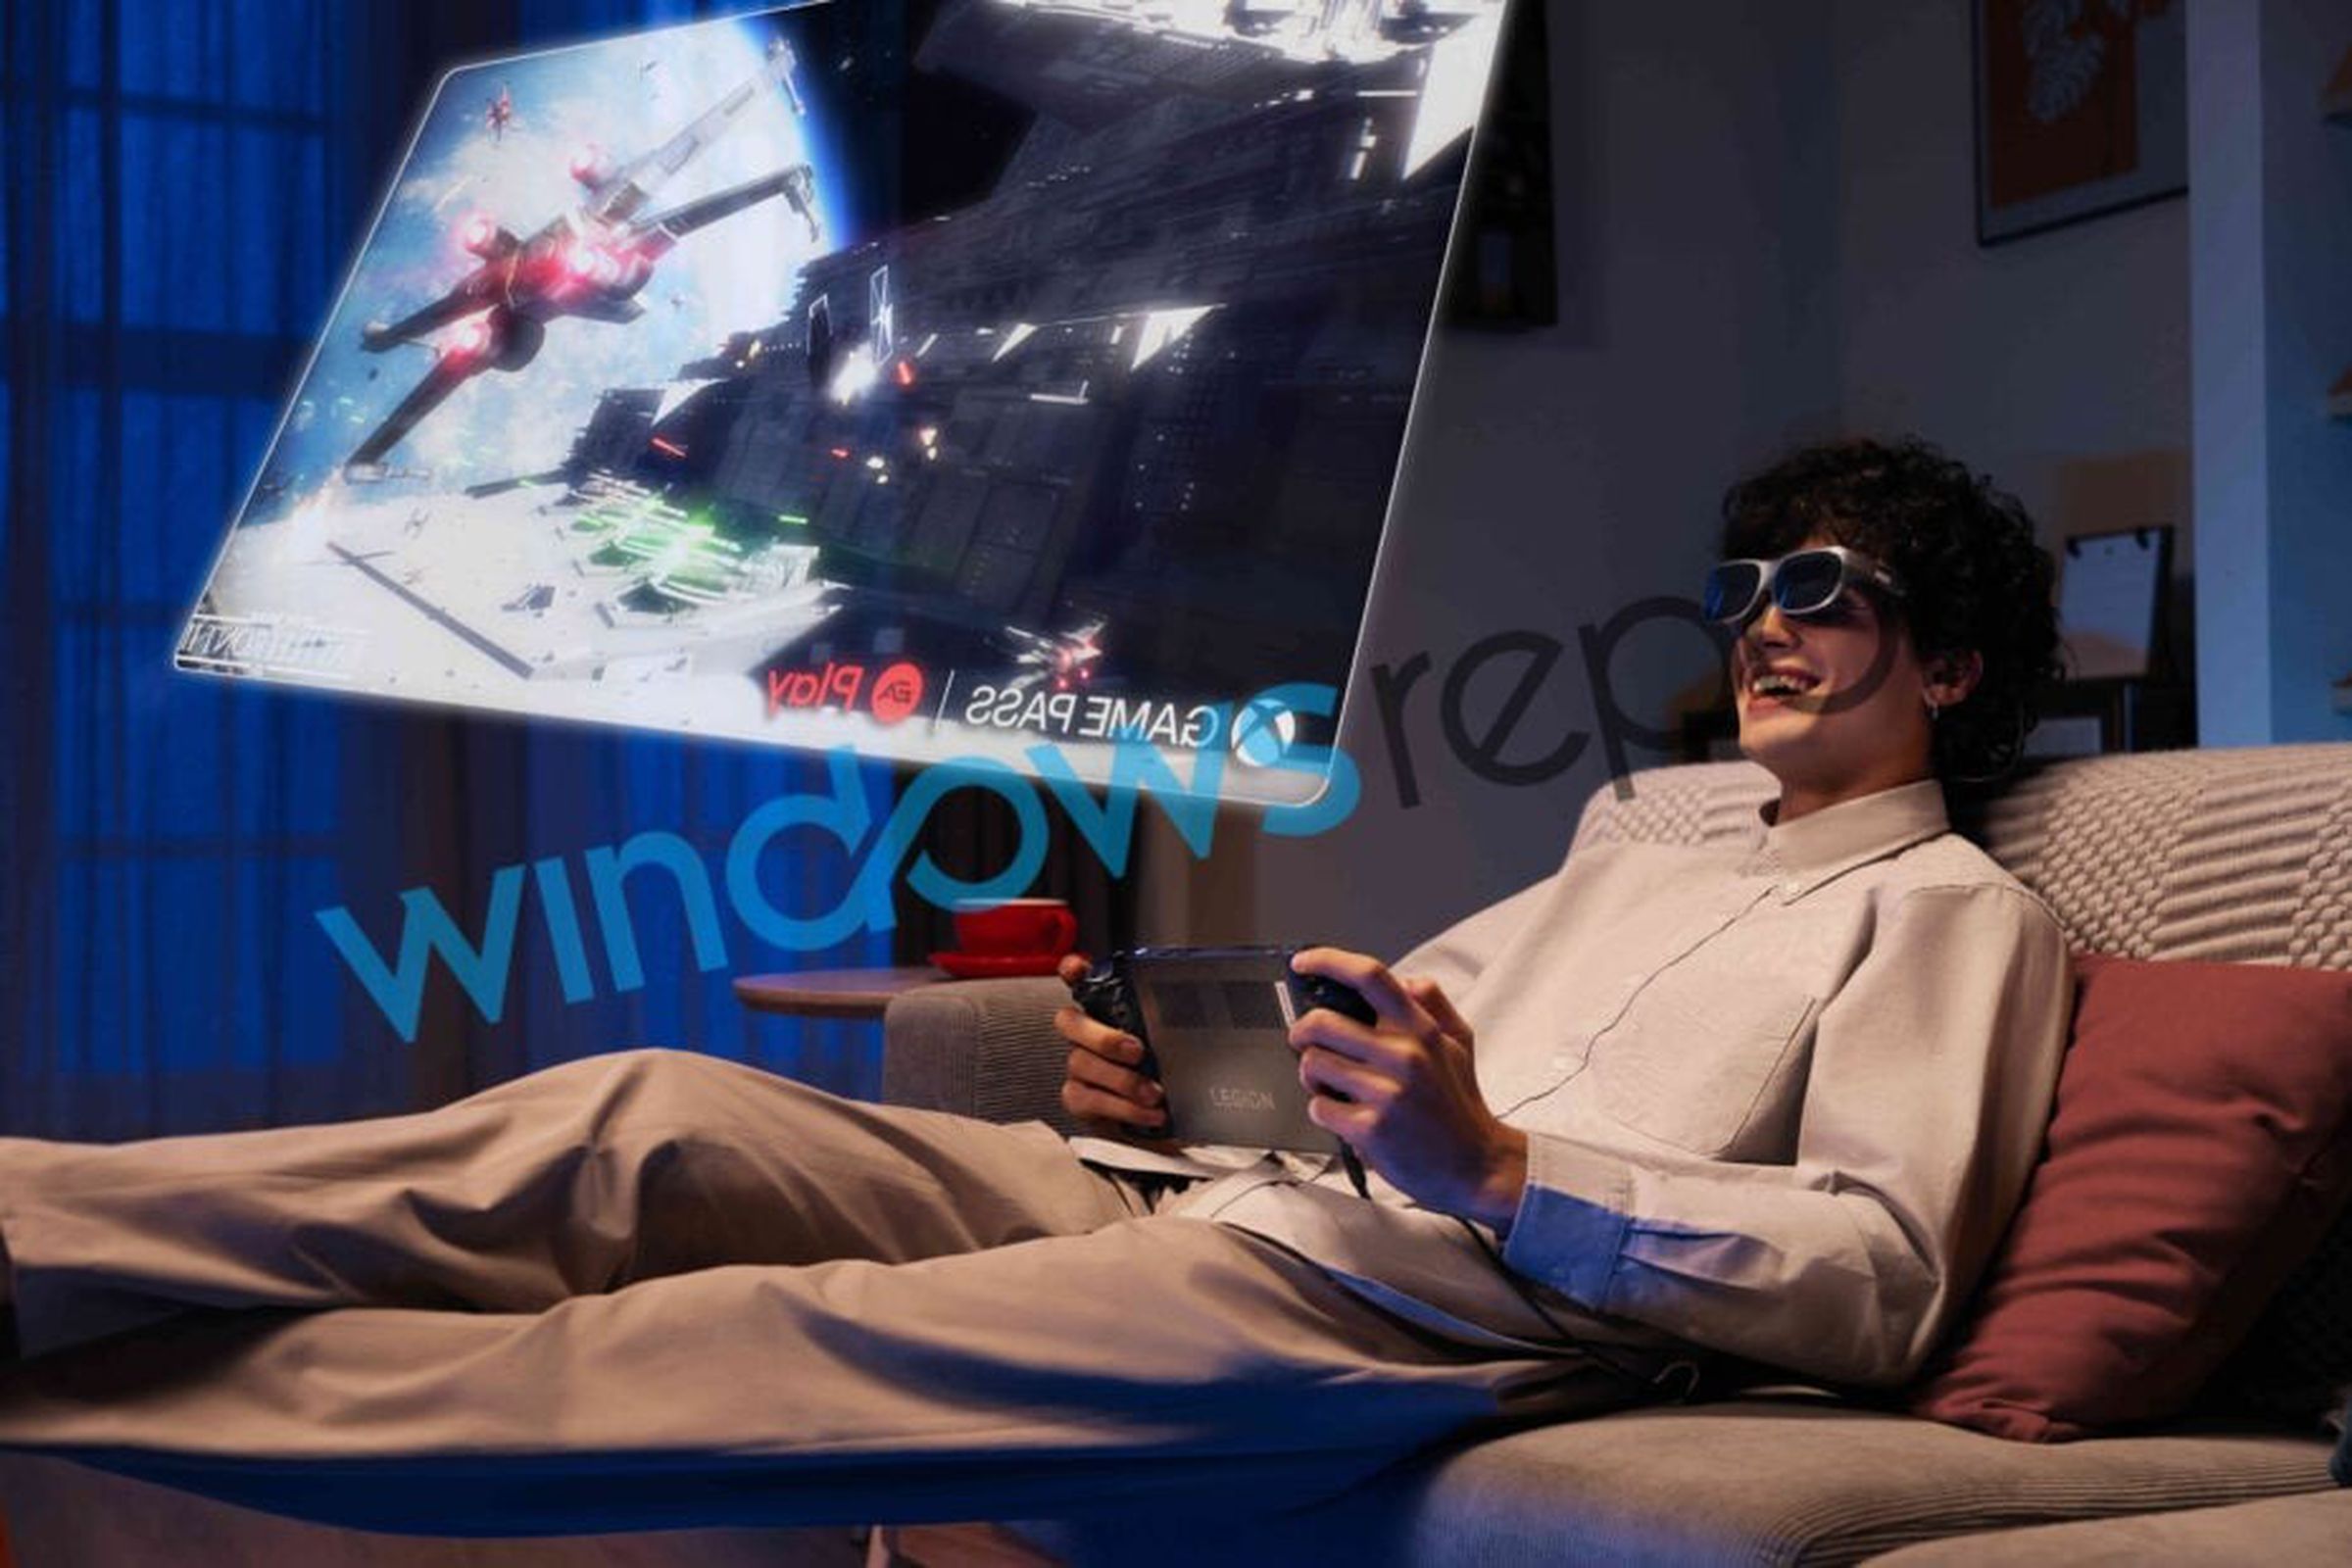 An image of somebody wearing AR glasses plugged into a Legion Go. The AR glasses are projecting a Star Wars game.